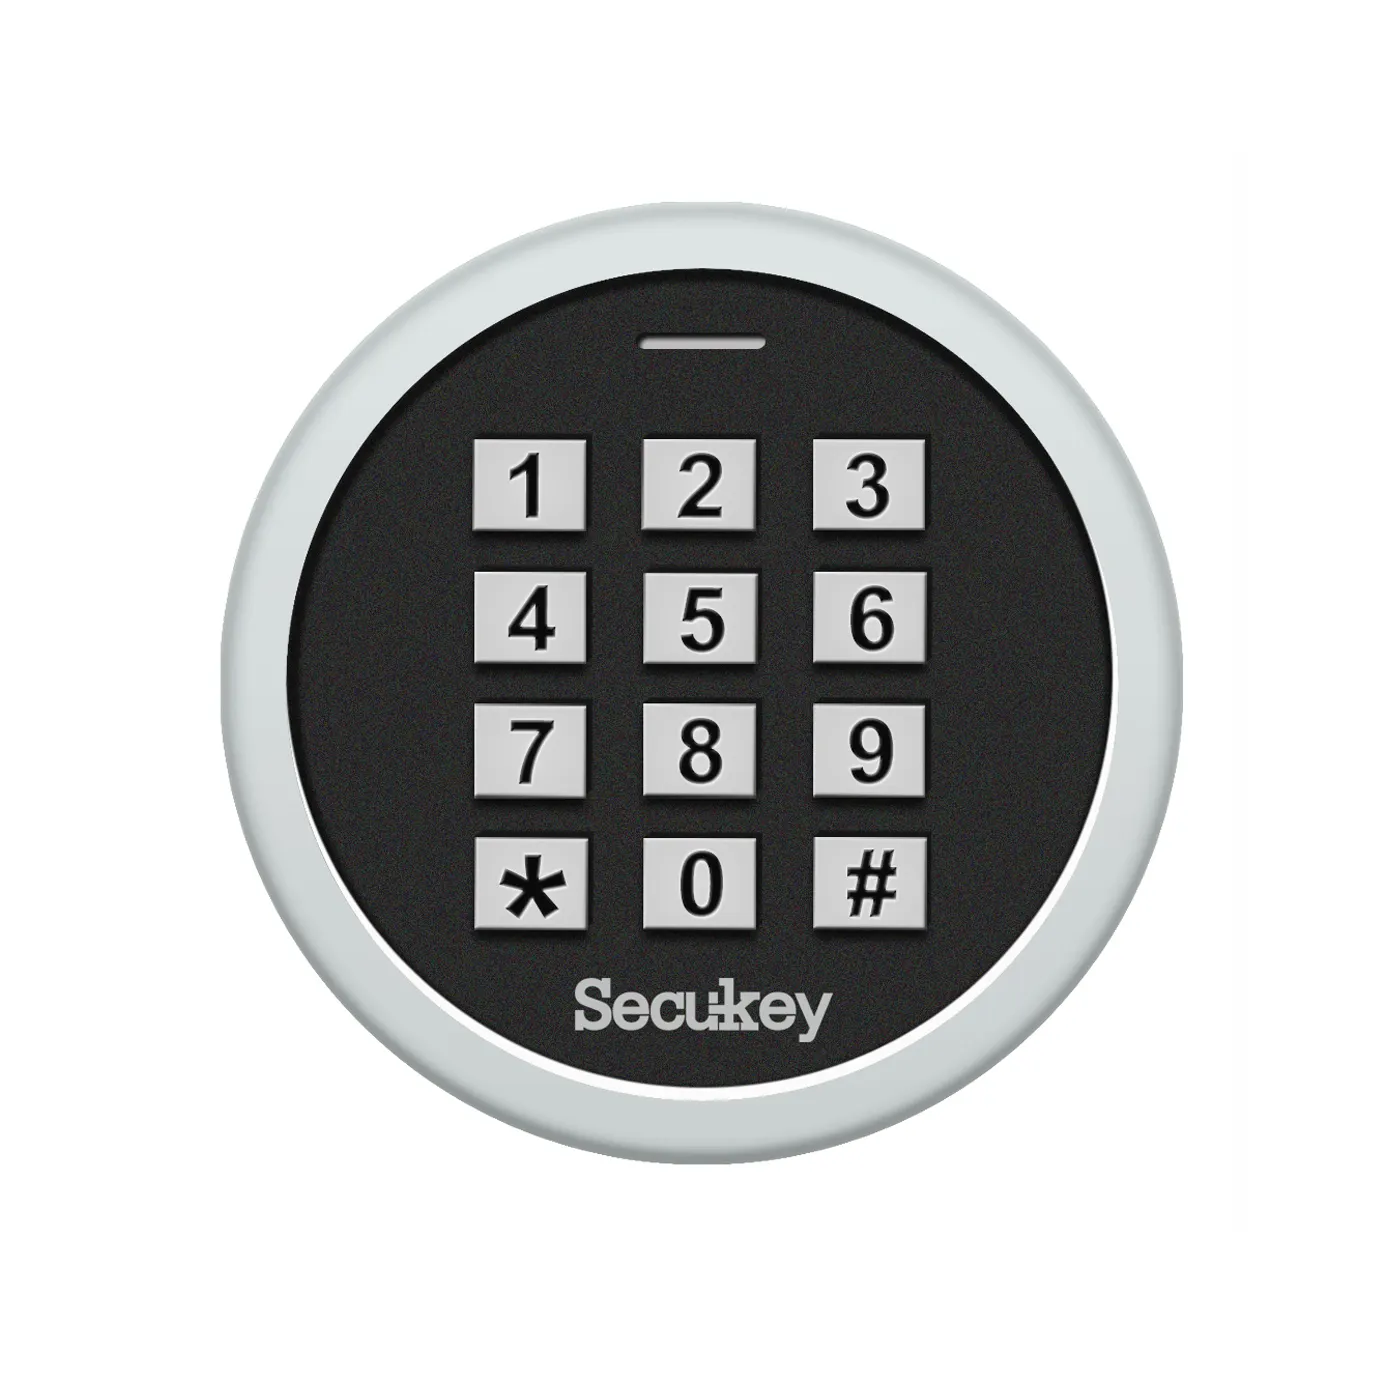 Access control with mobile app